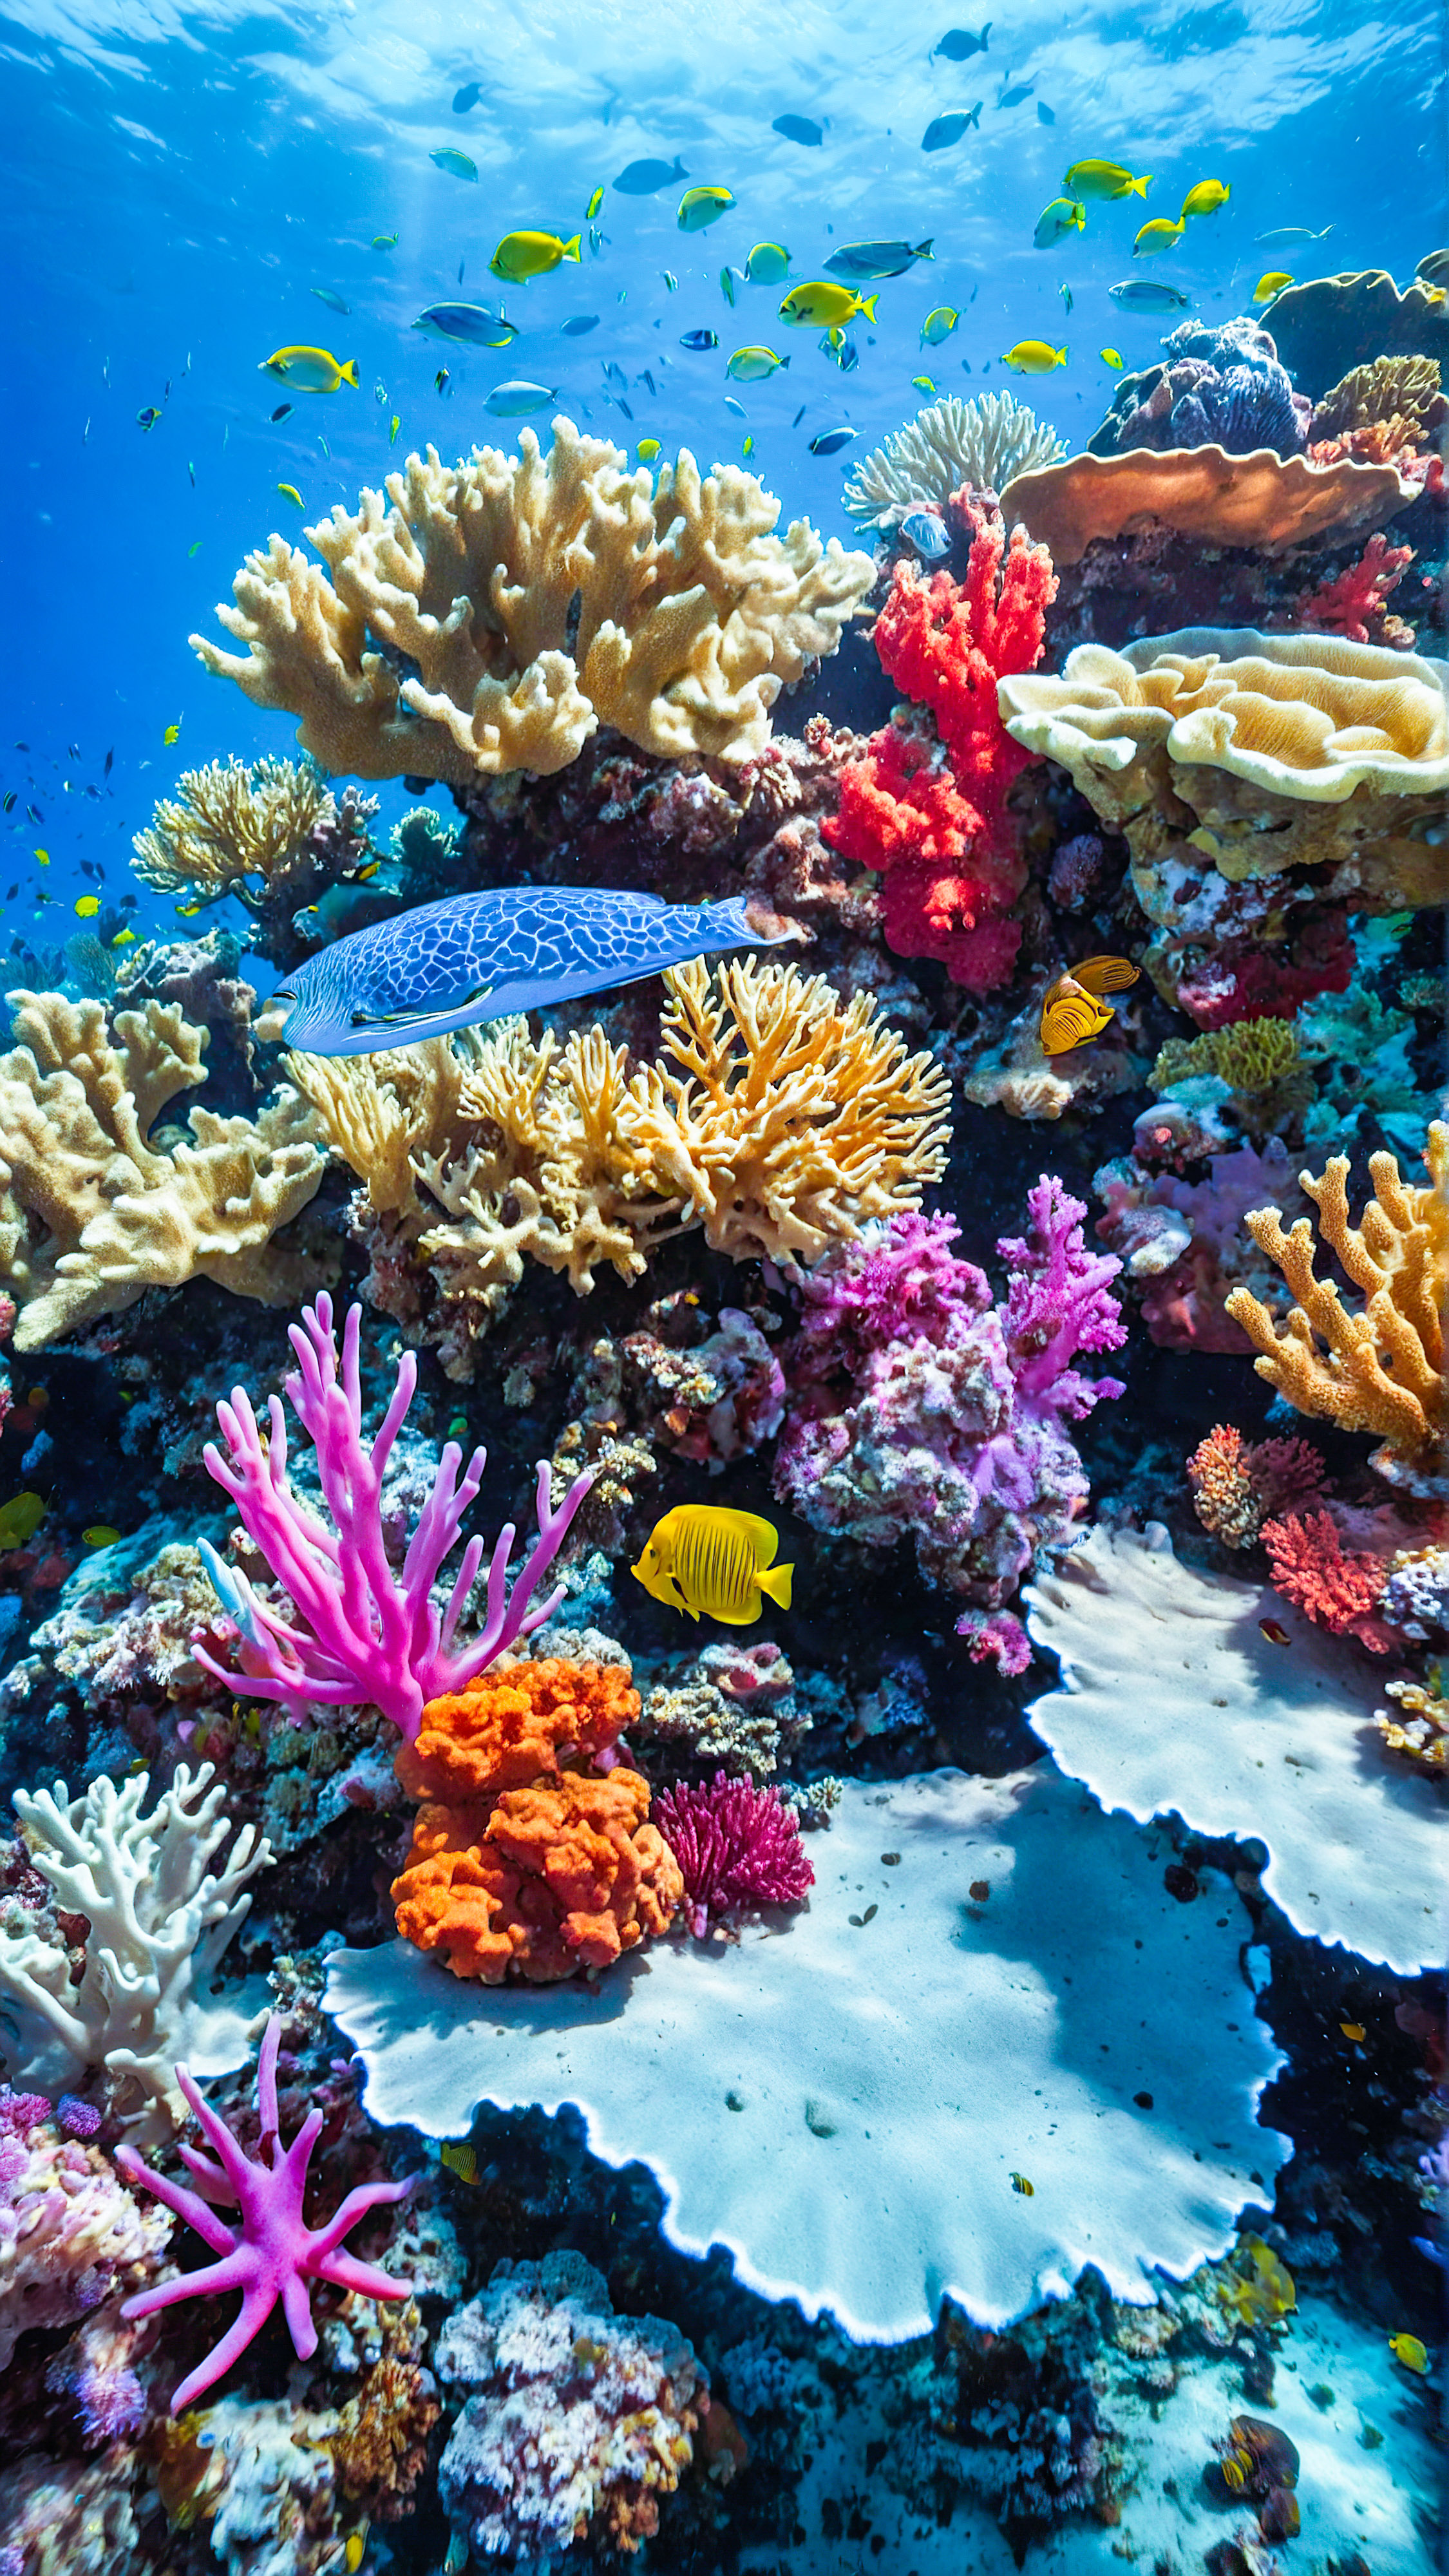 Get mesmerized with our iPhone cool background, showcasing a vibrant coral reef teeming with colorful marine life.